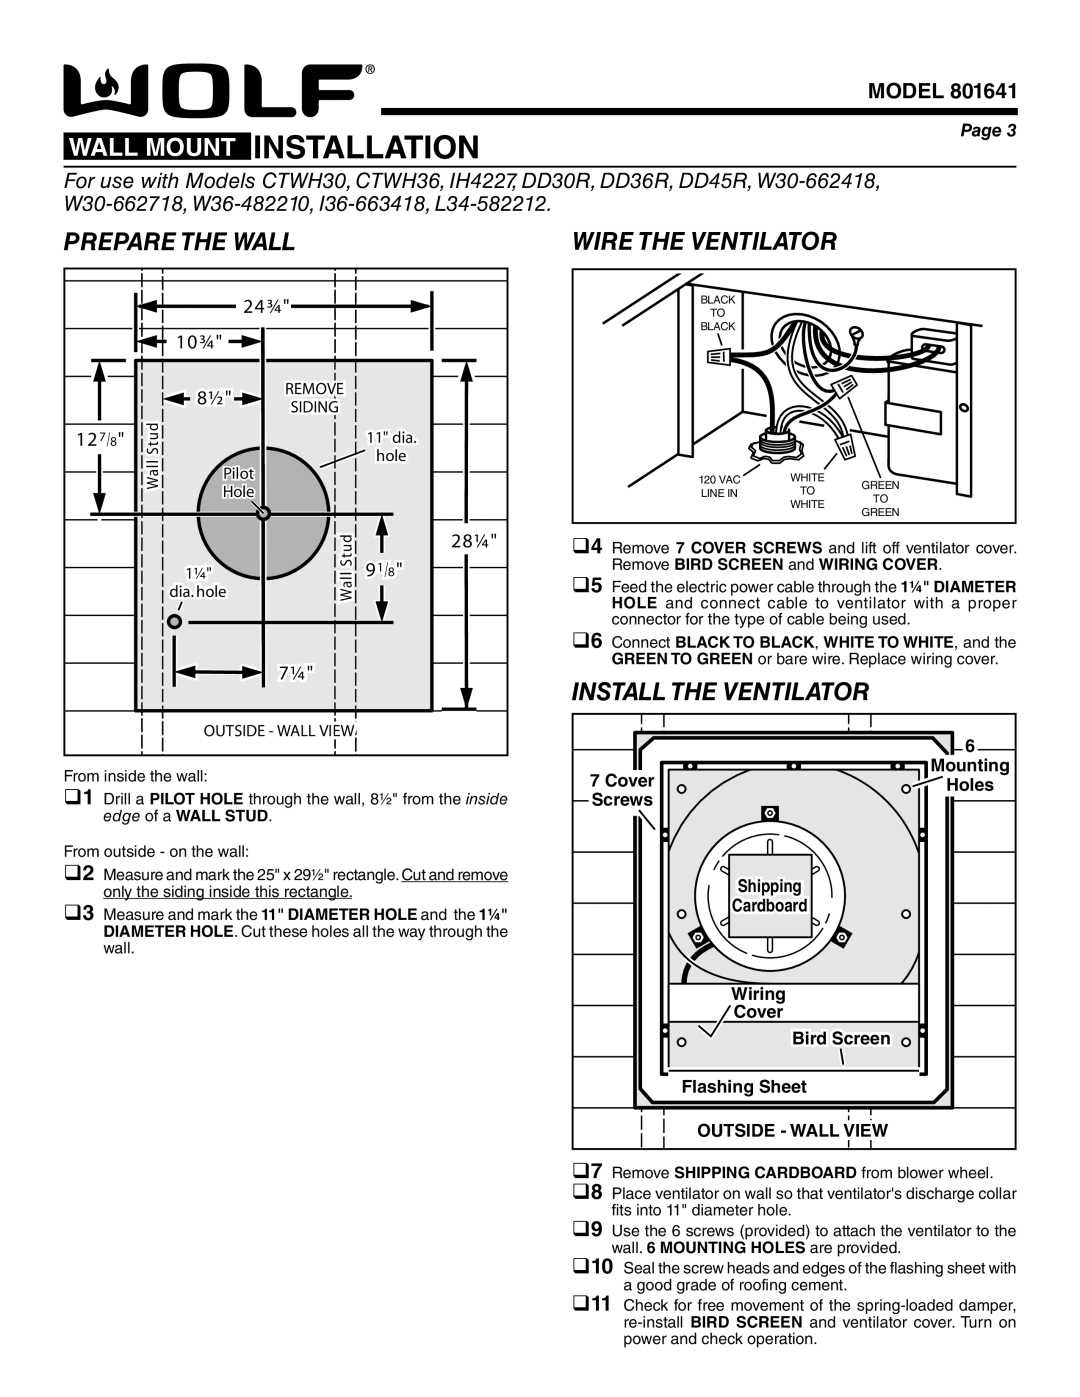 Wolf Appliance Company 801640 Wall Mount Installation, Prepare The Wall, 127/8, Wire The Ventilator, Model, Page, Pilot 